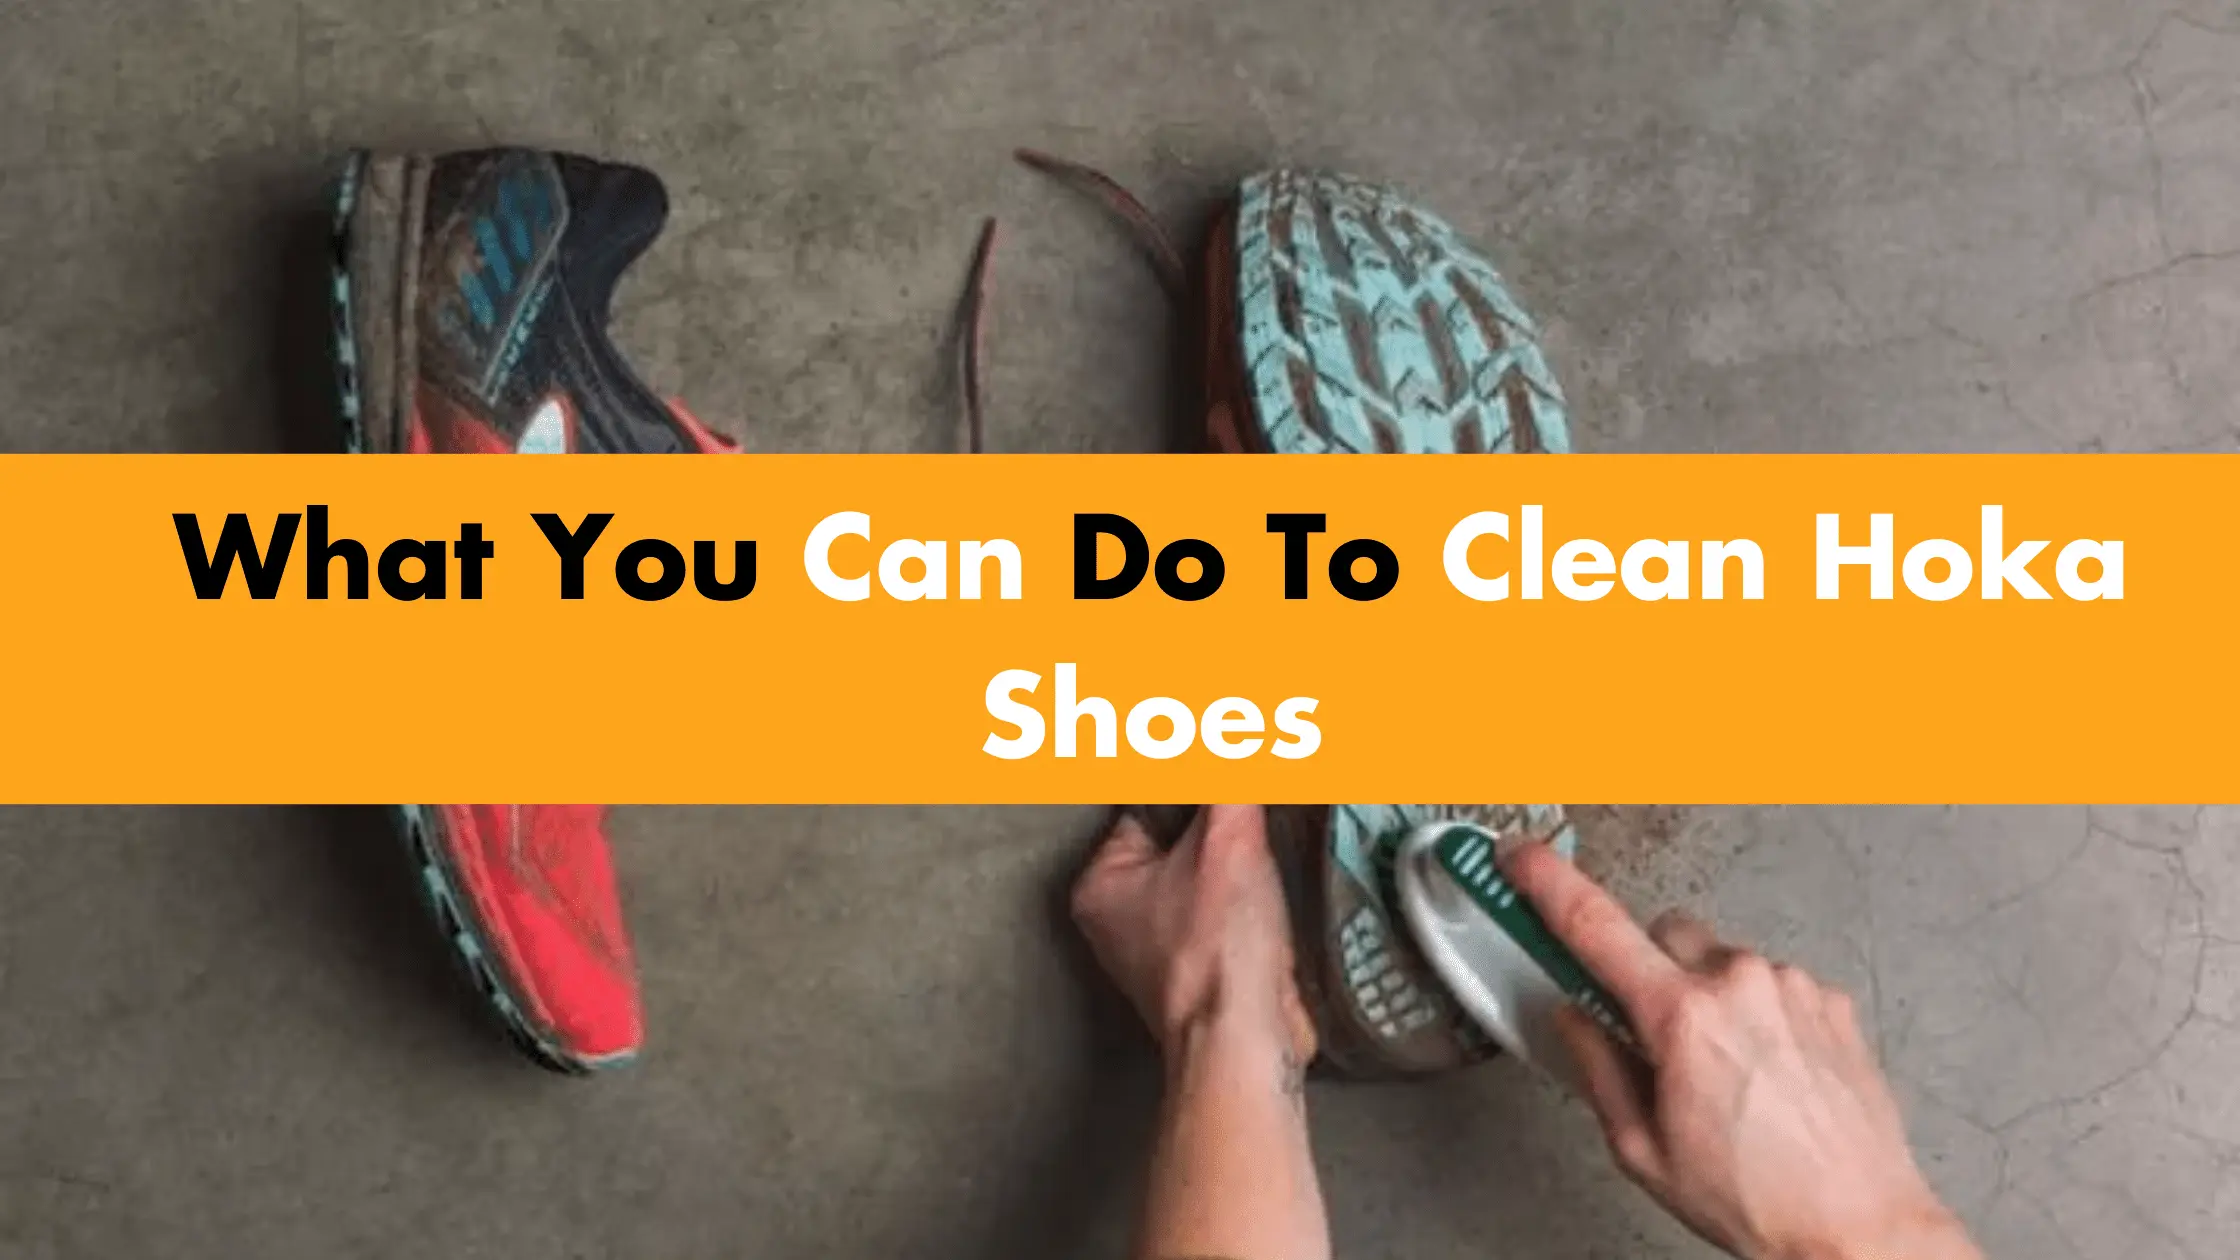 What You Can Do To Clean Hoka Shoes?